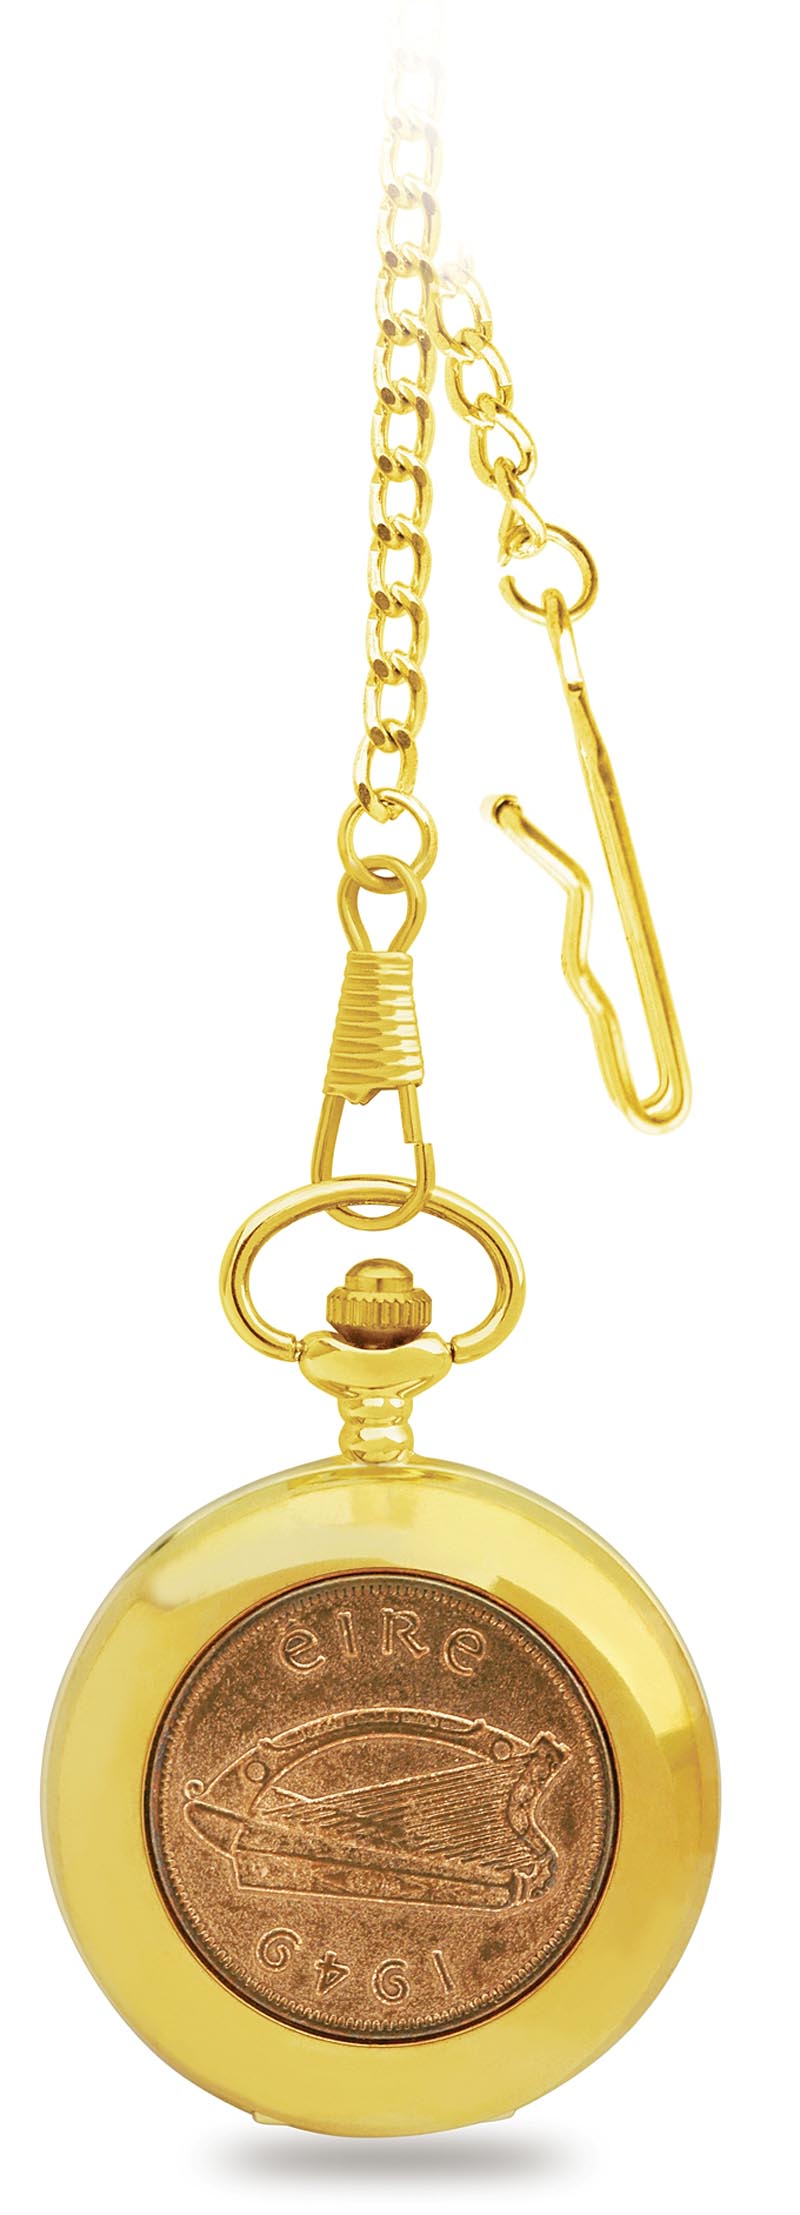 Product image for Irish Penny Pocket Watch - Gold Plated